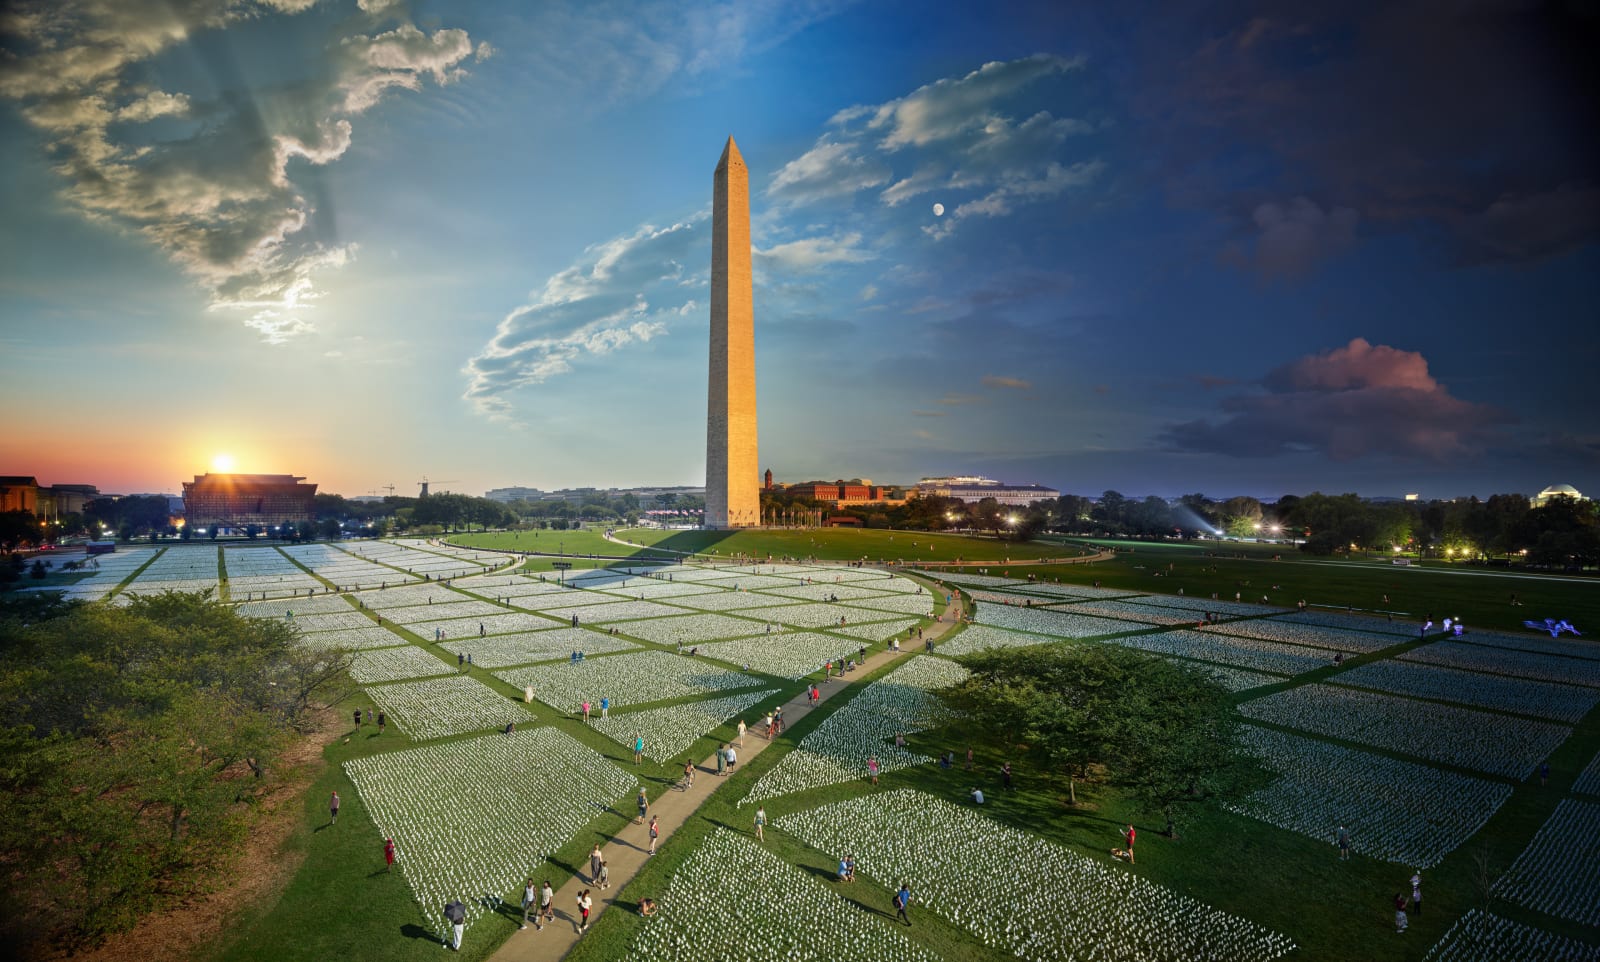 Stephen Wilkes, 'In America: Remember', Washington DC, Day to Night™, 2021